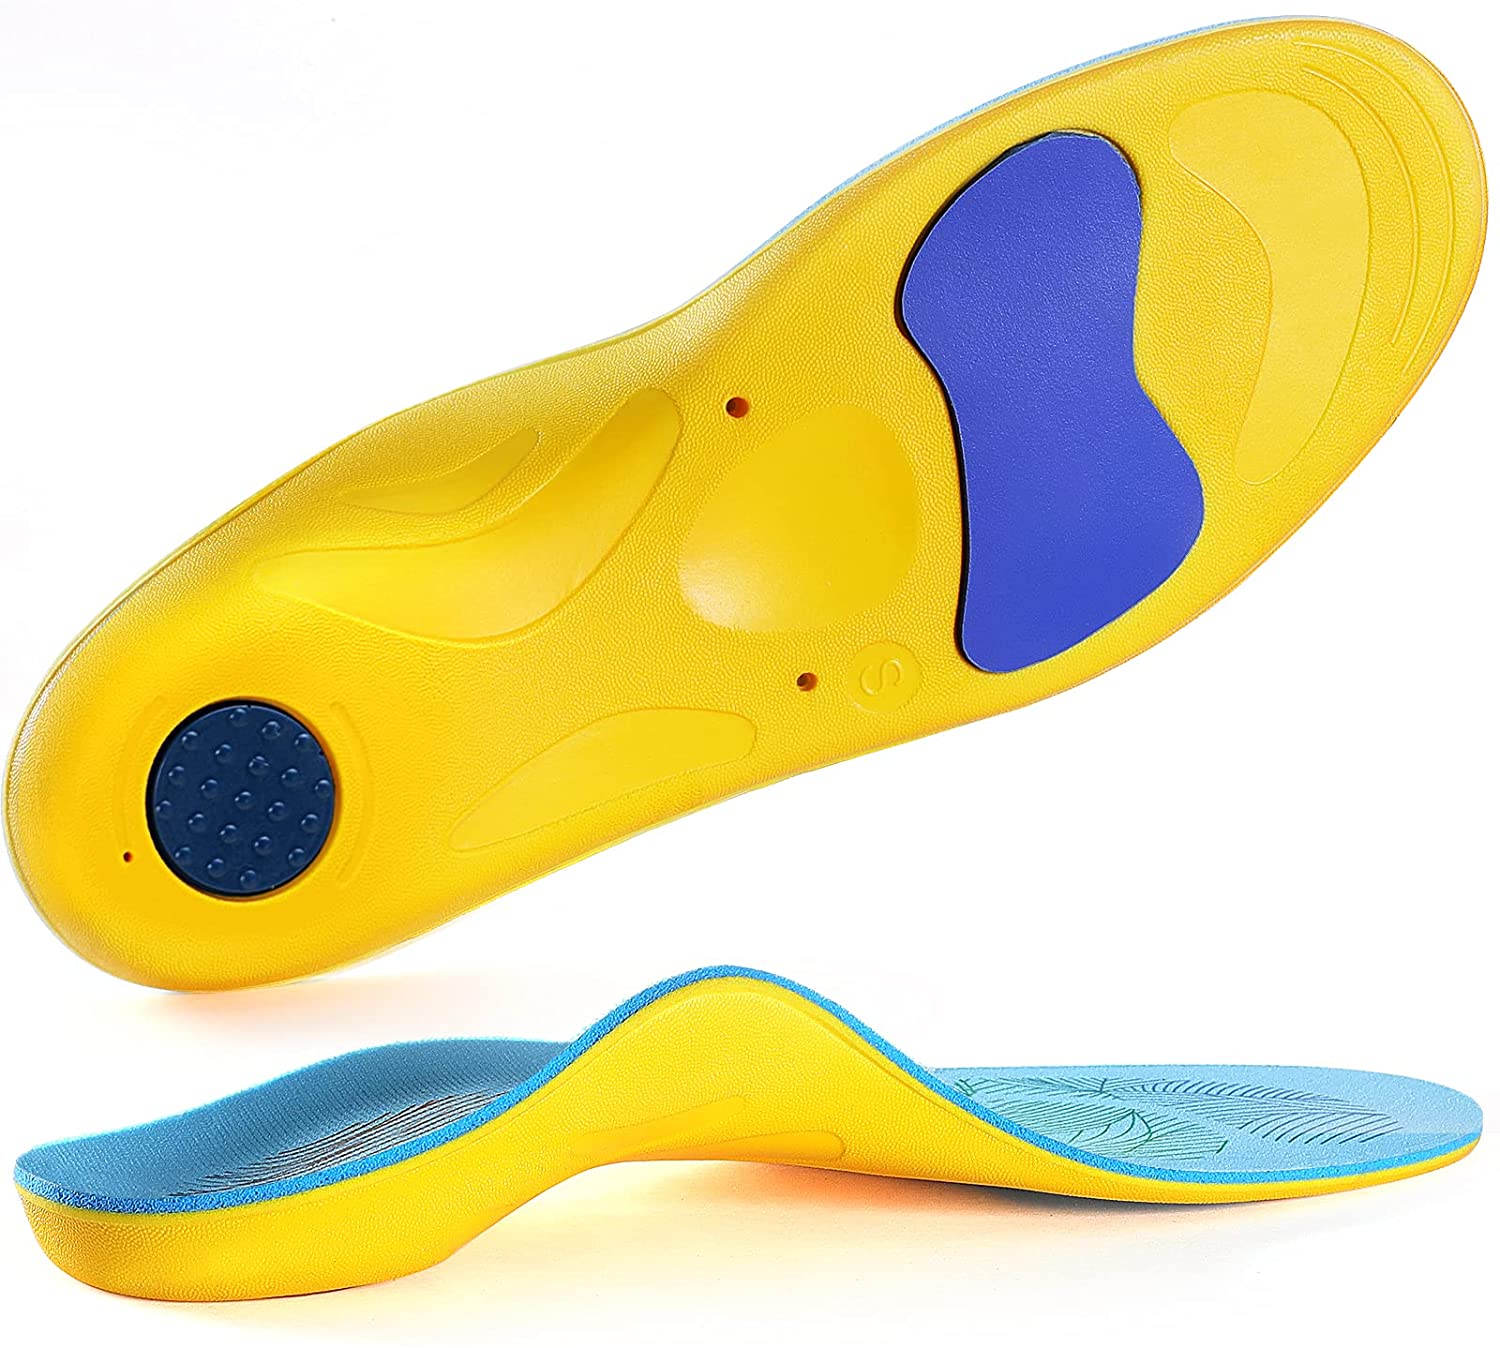 5 Common Advantages And Disadvantages Of Custom Shoe Insole